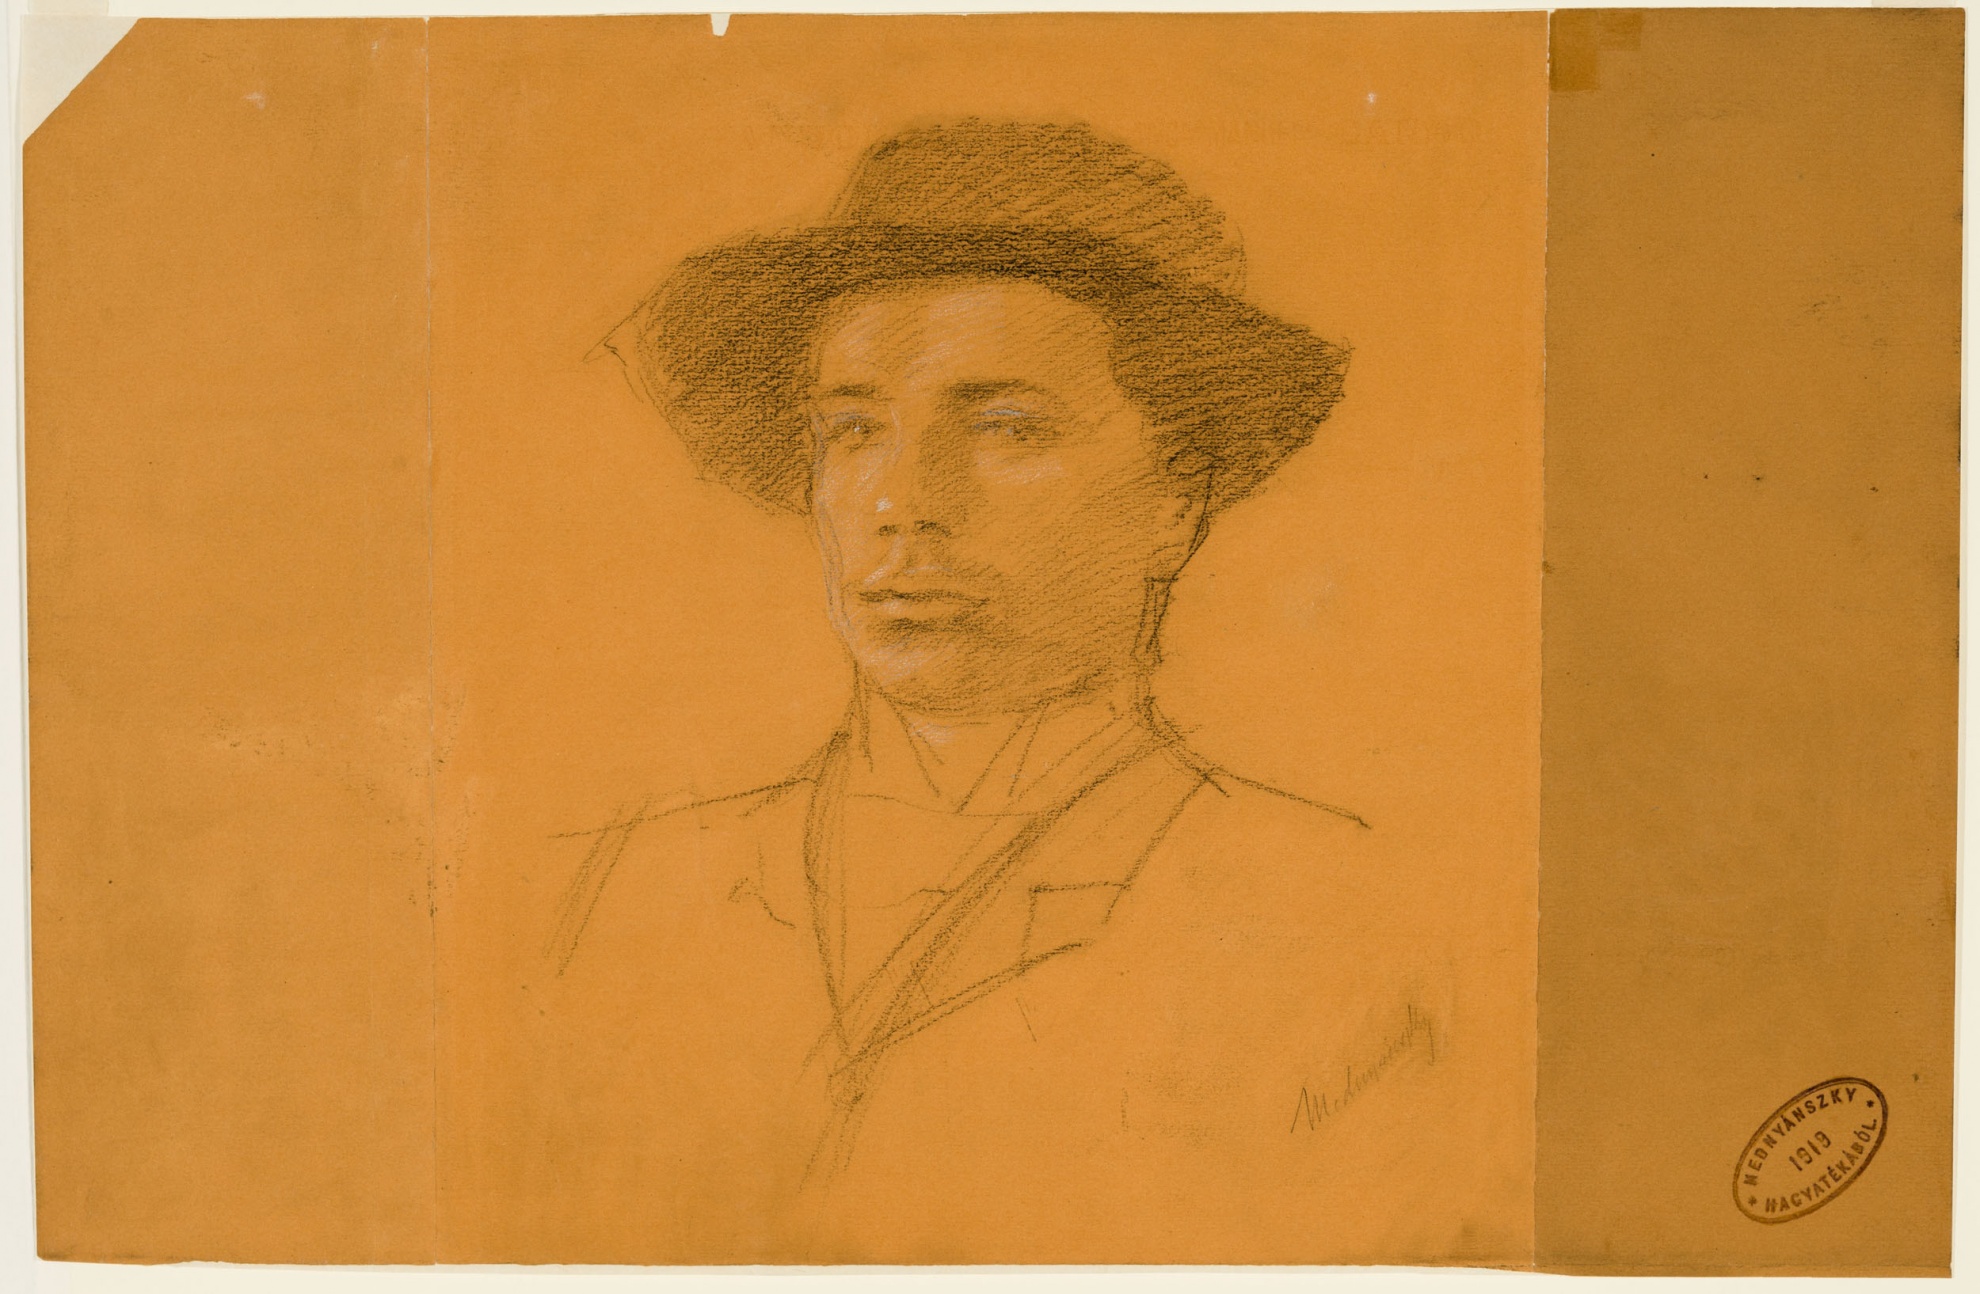 untitled (known as “Man in a Hat”)

(The Salgo Trust for Education CC BY-NC-SA)